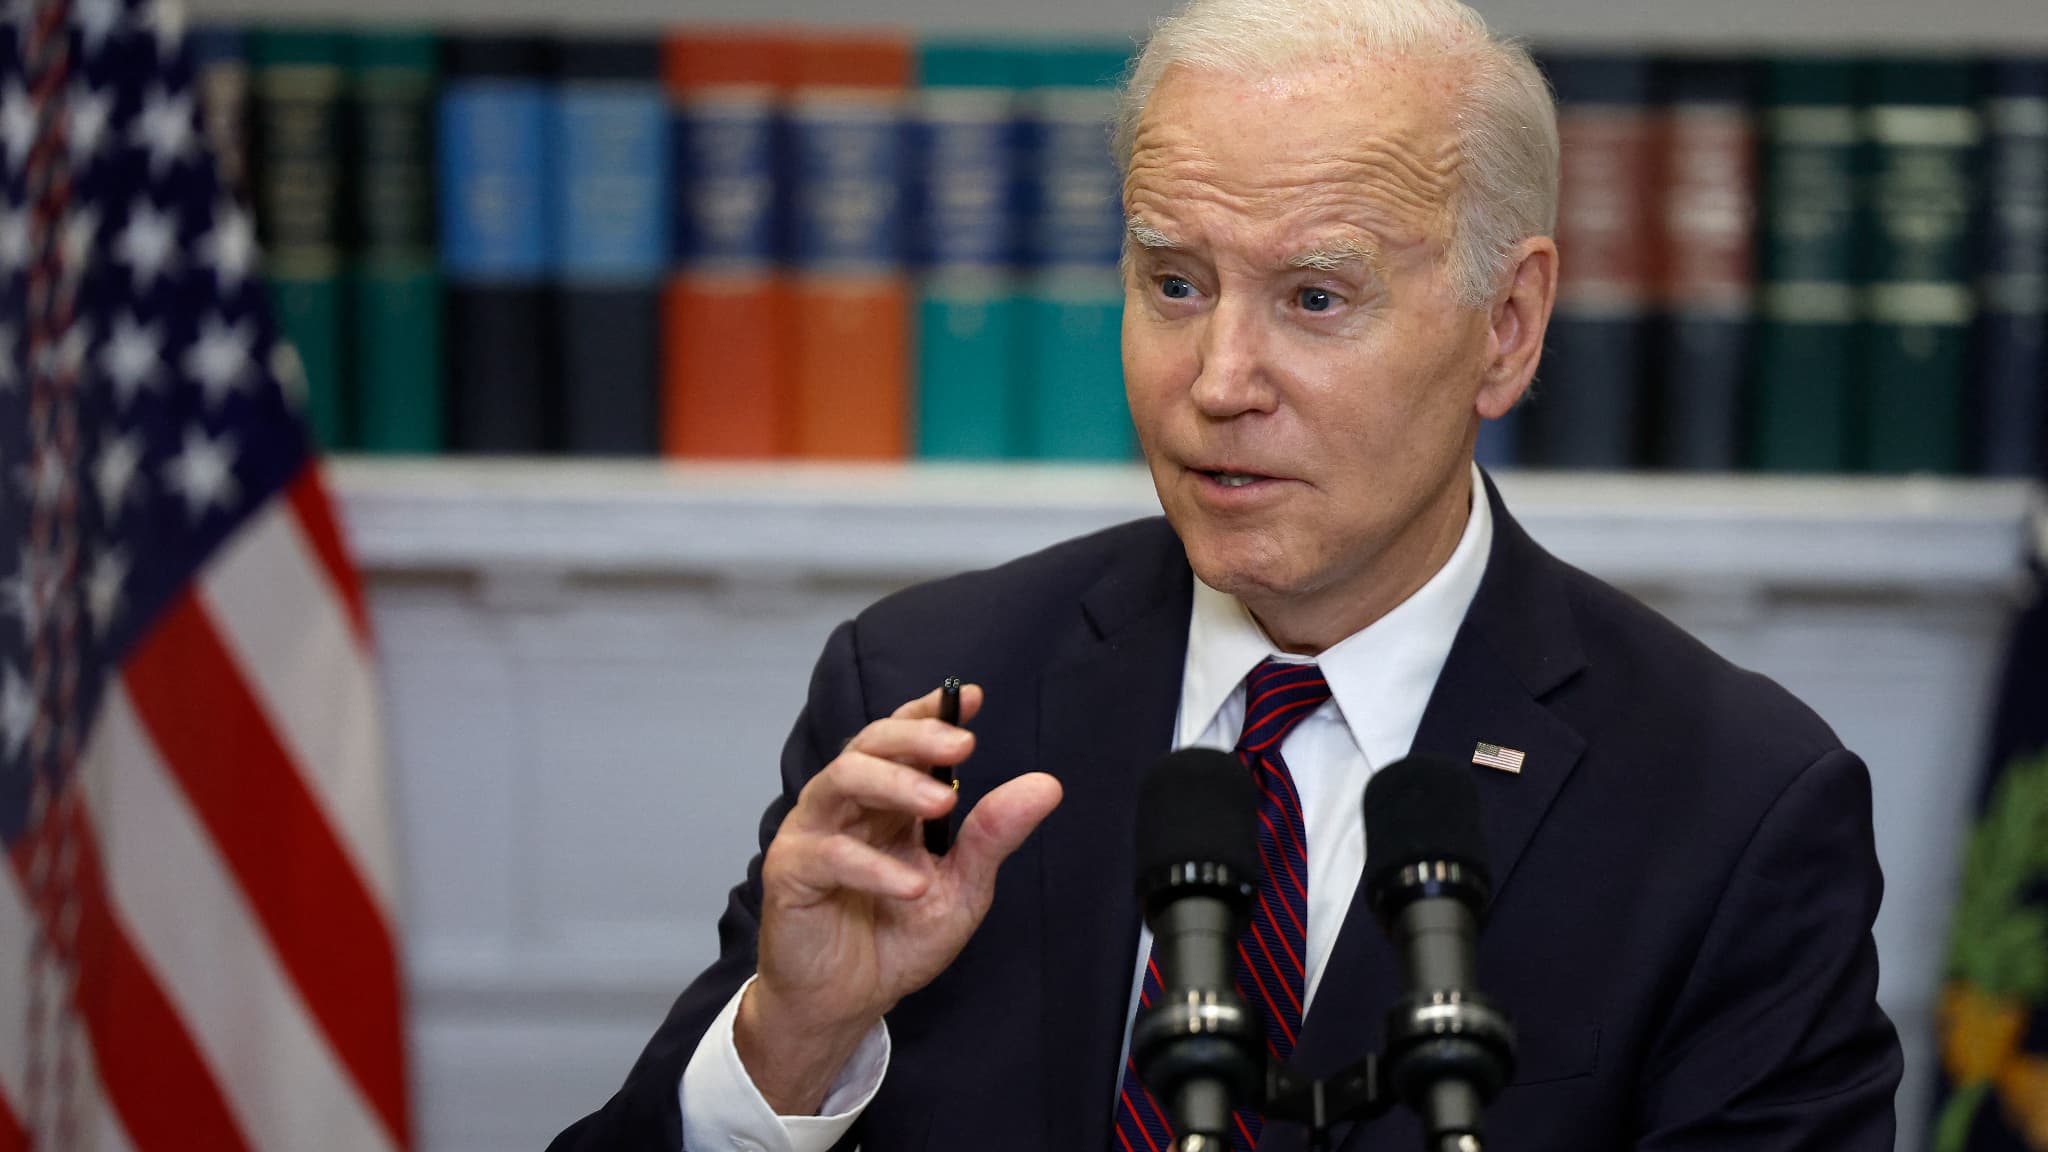 Biden was attacked by conservative Fox News on the day of Trump’s impeachment